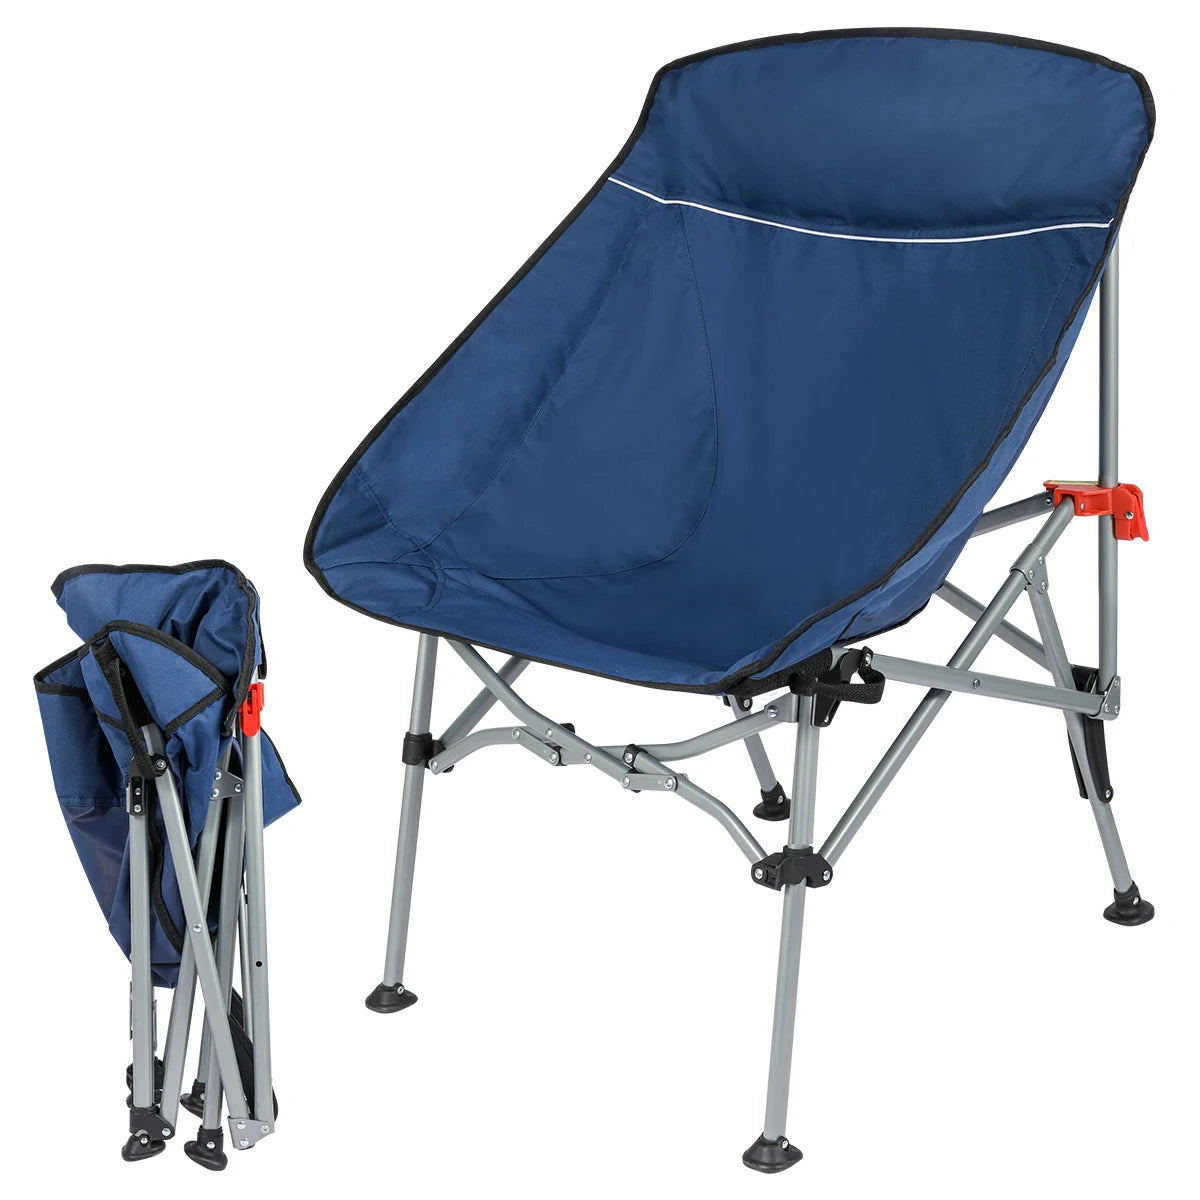 REDCAMP Oversized Folding Camping Chair for Adults Heavy Duty